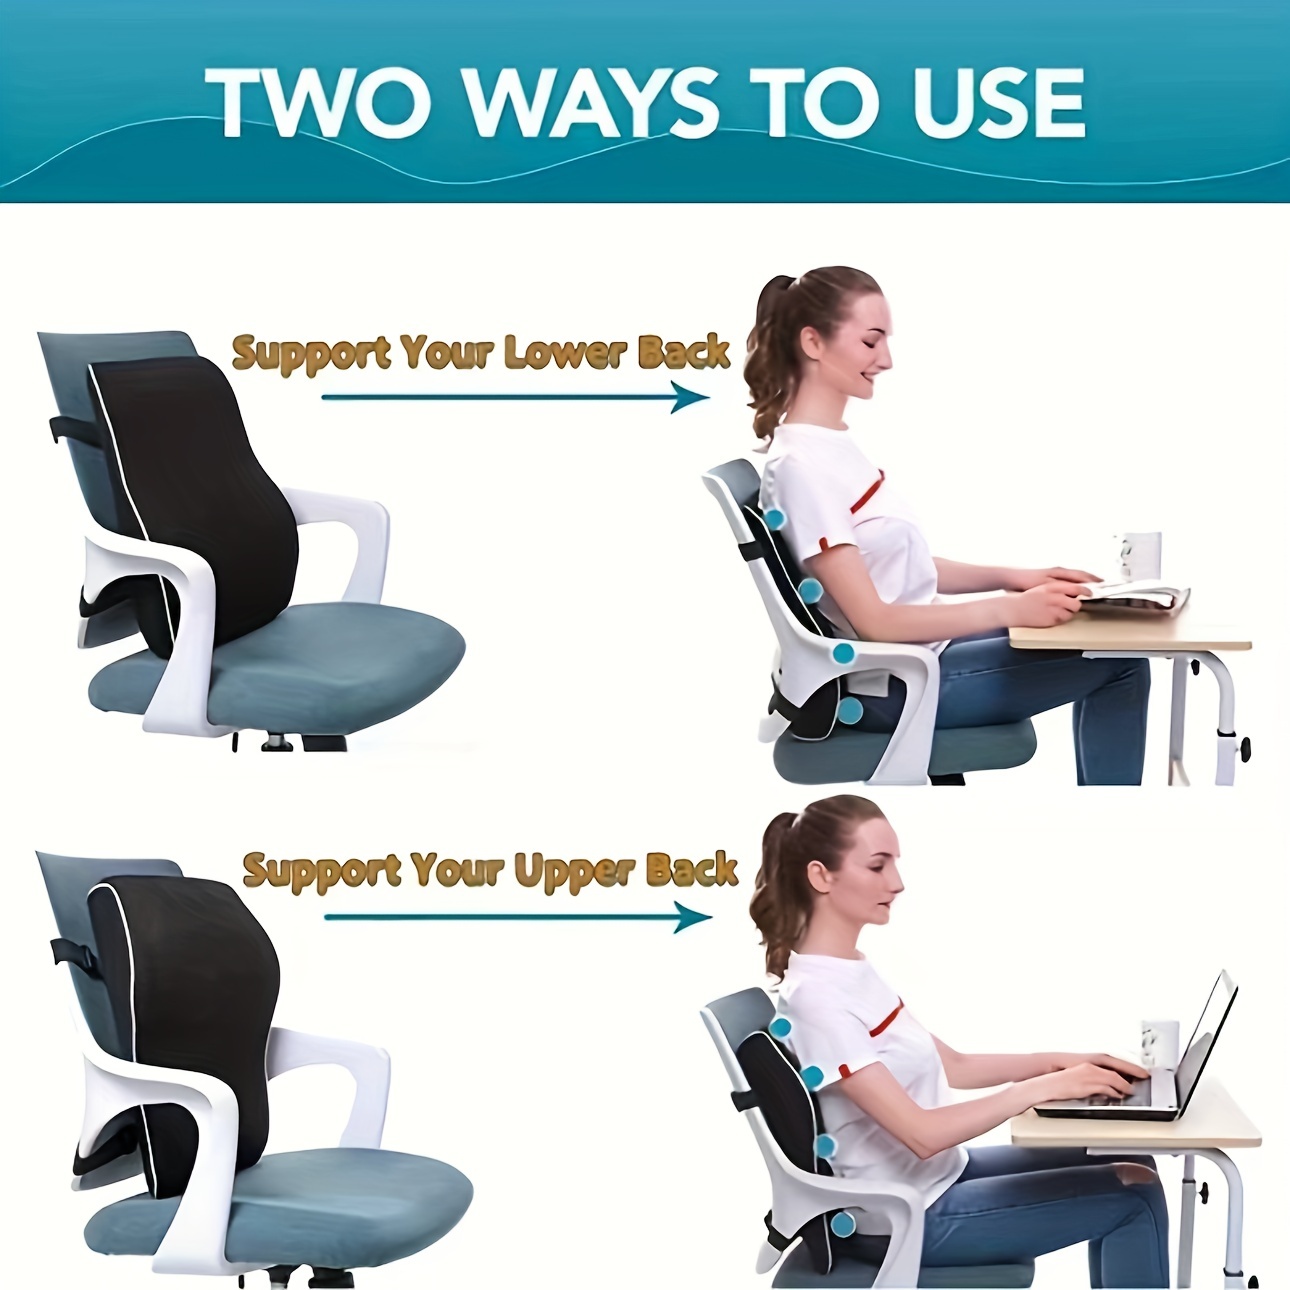 Memory Foam Lumbar Support Back Cushion Pillow Balanced Firmness for Lower  Back Pain Relief - Ideal Back Pillow for Office Chair,Car Seat, Recliner